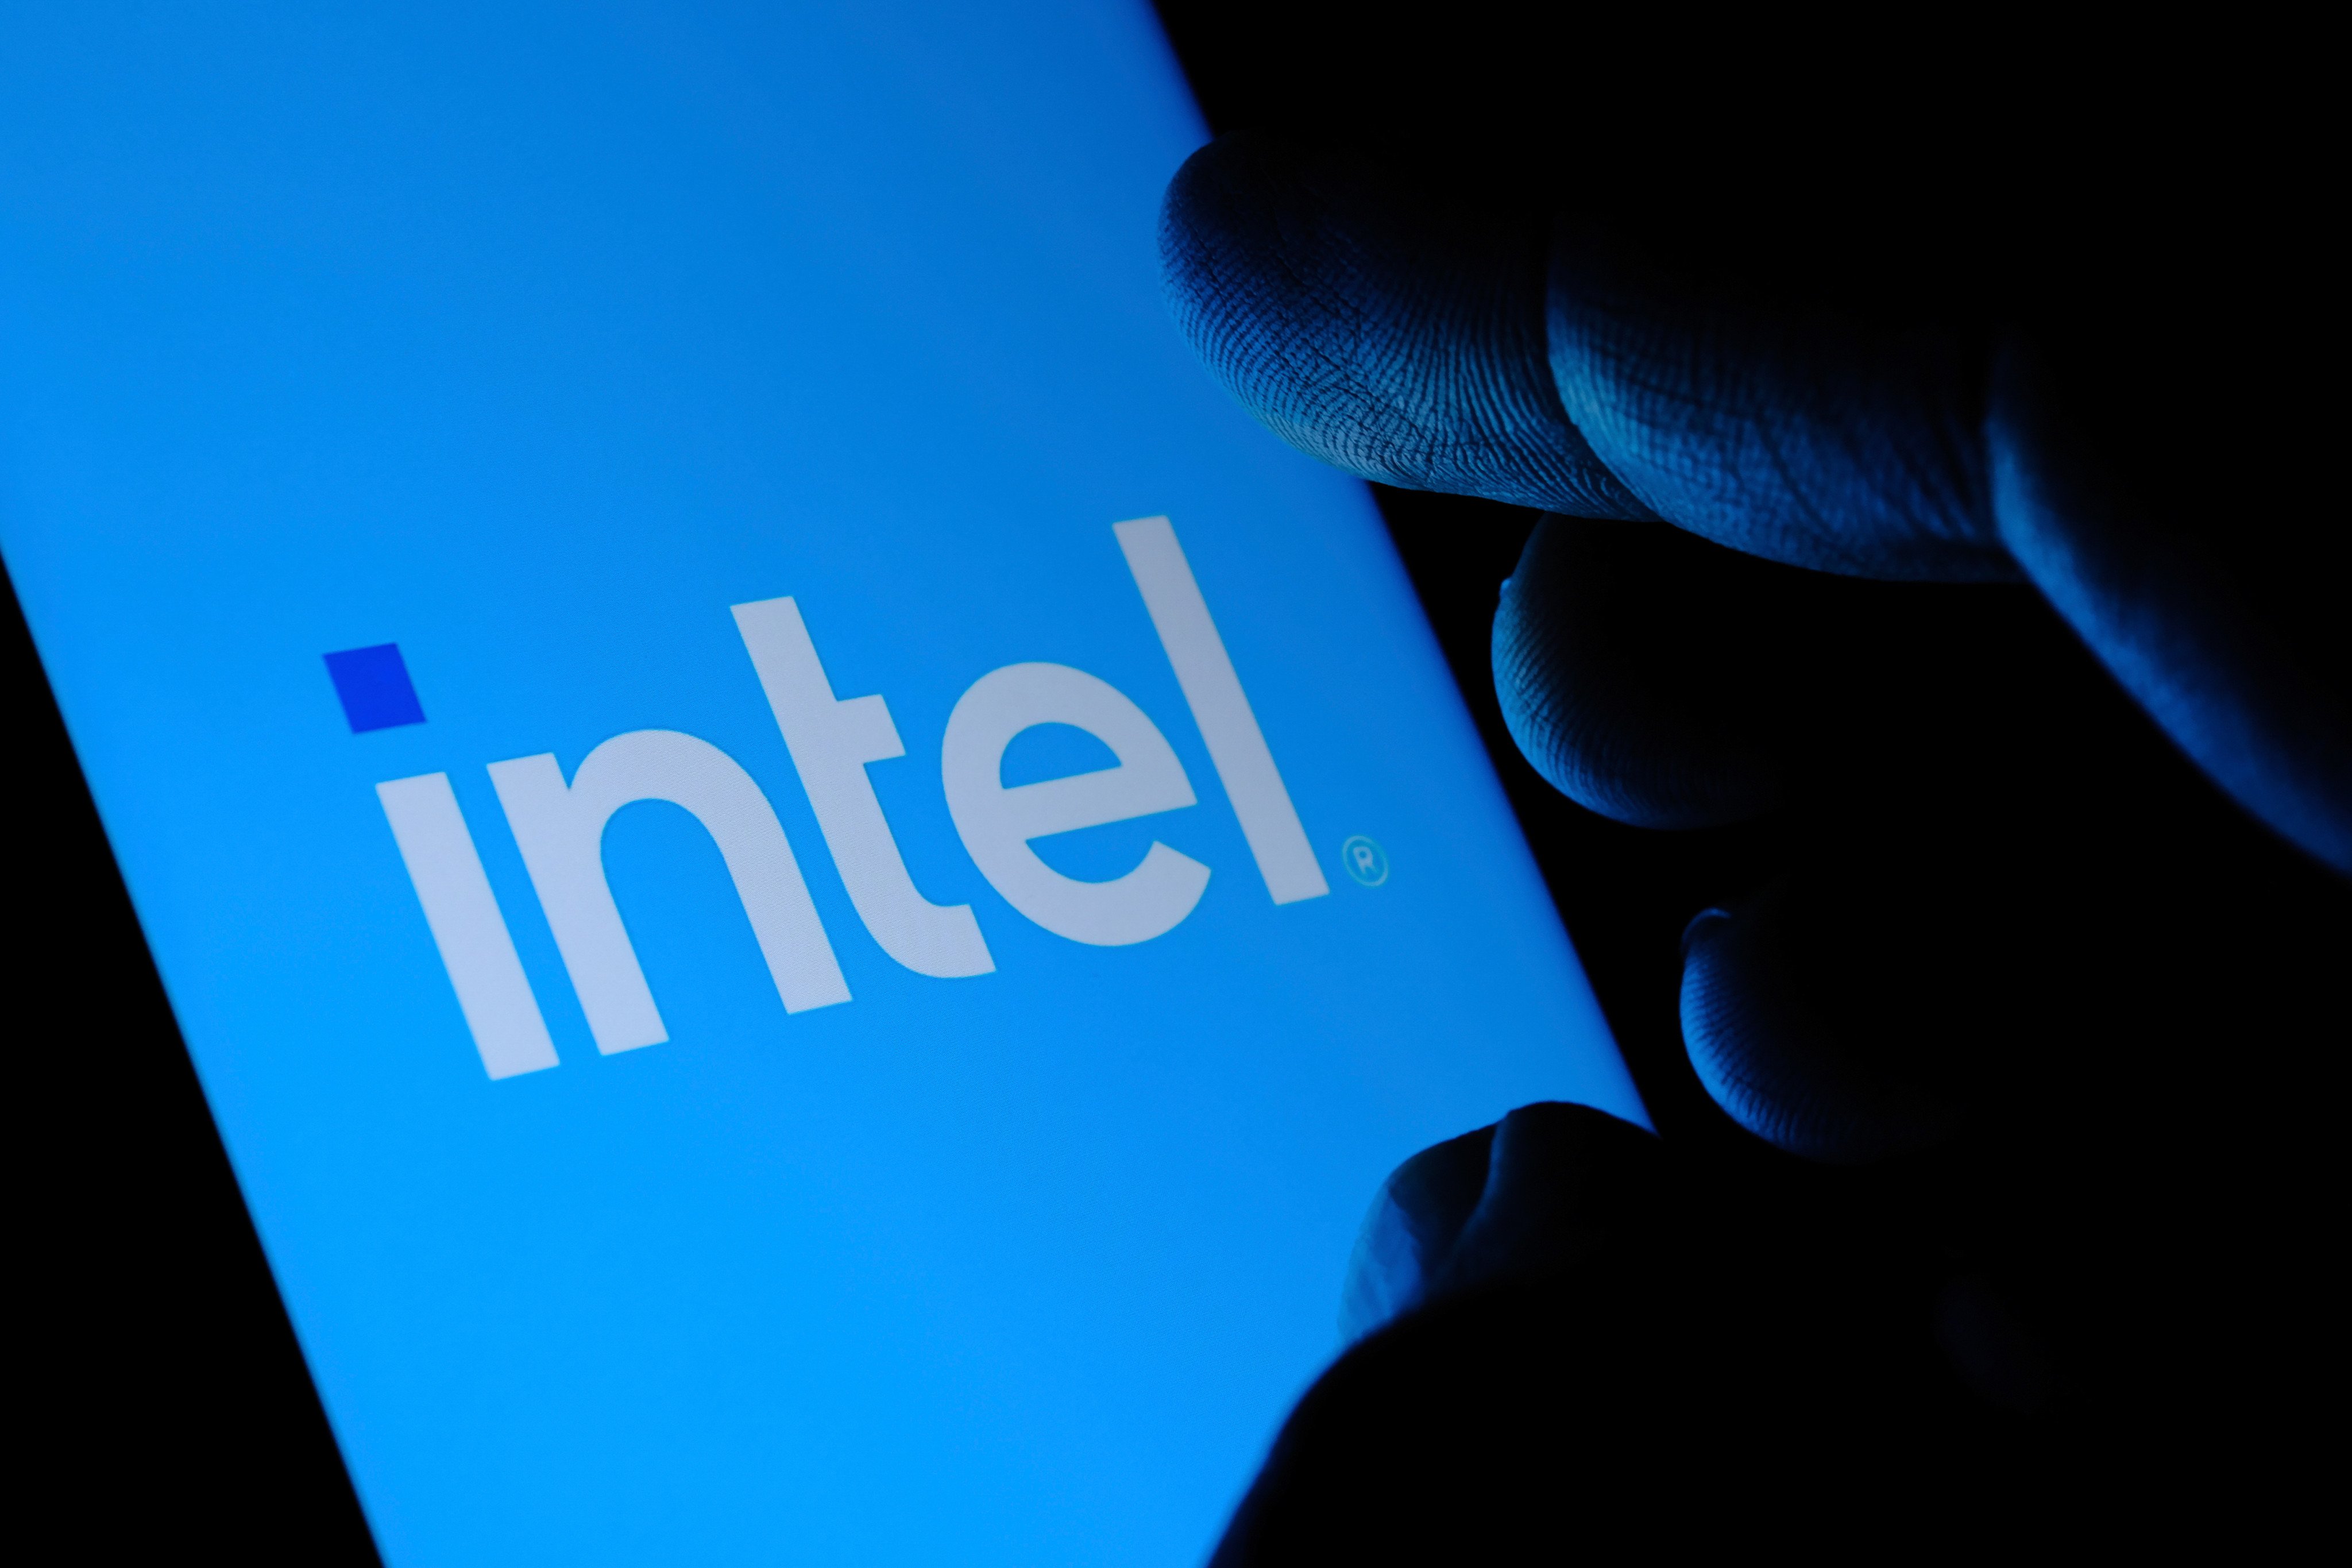 Intel’s latest investment comes amid growing US tech restrictions on the mainland. Photo: Shutterstock